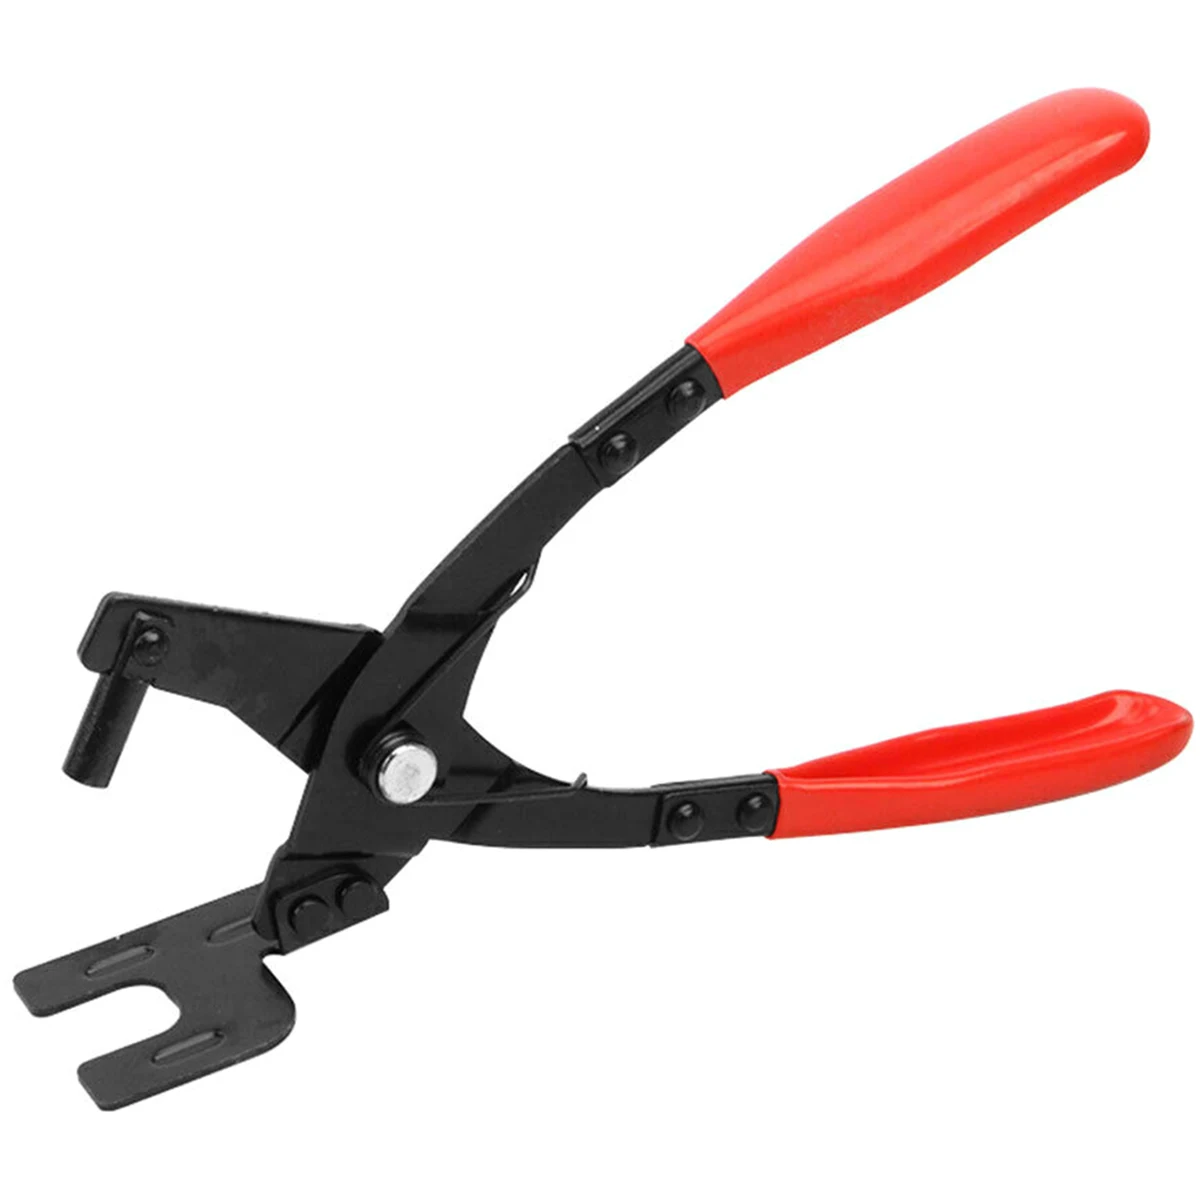 Exhaust Pliers Exhaust Hanger Removal Plier Car Exhaust Rubber Pad Plier Puller Tool Exhaust pipe rubber gasket removal pliers